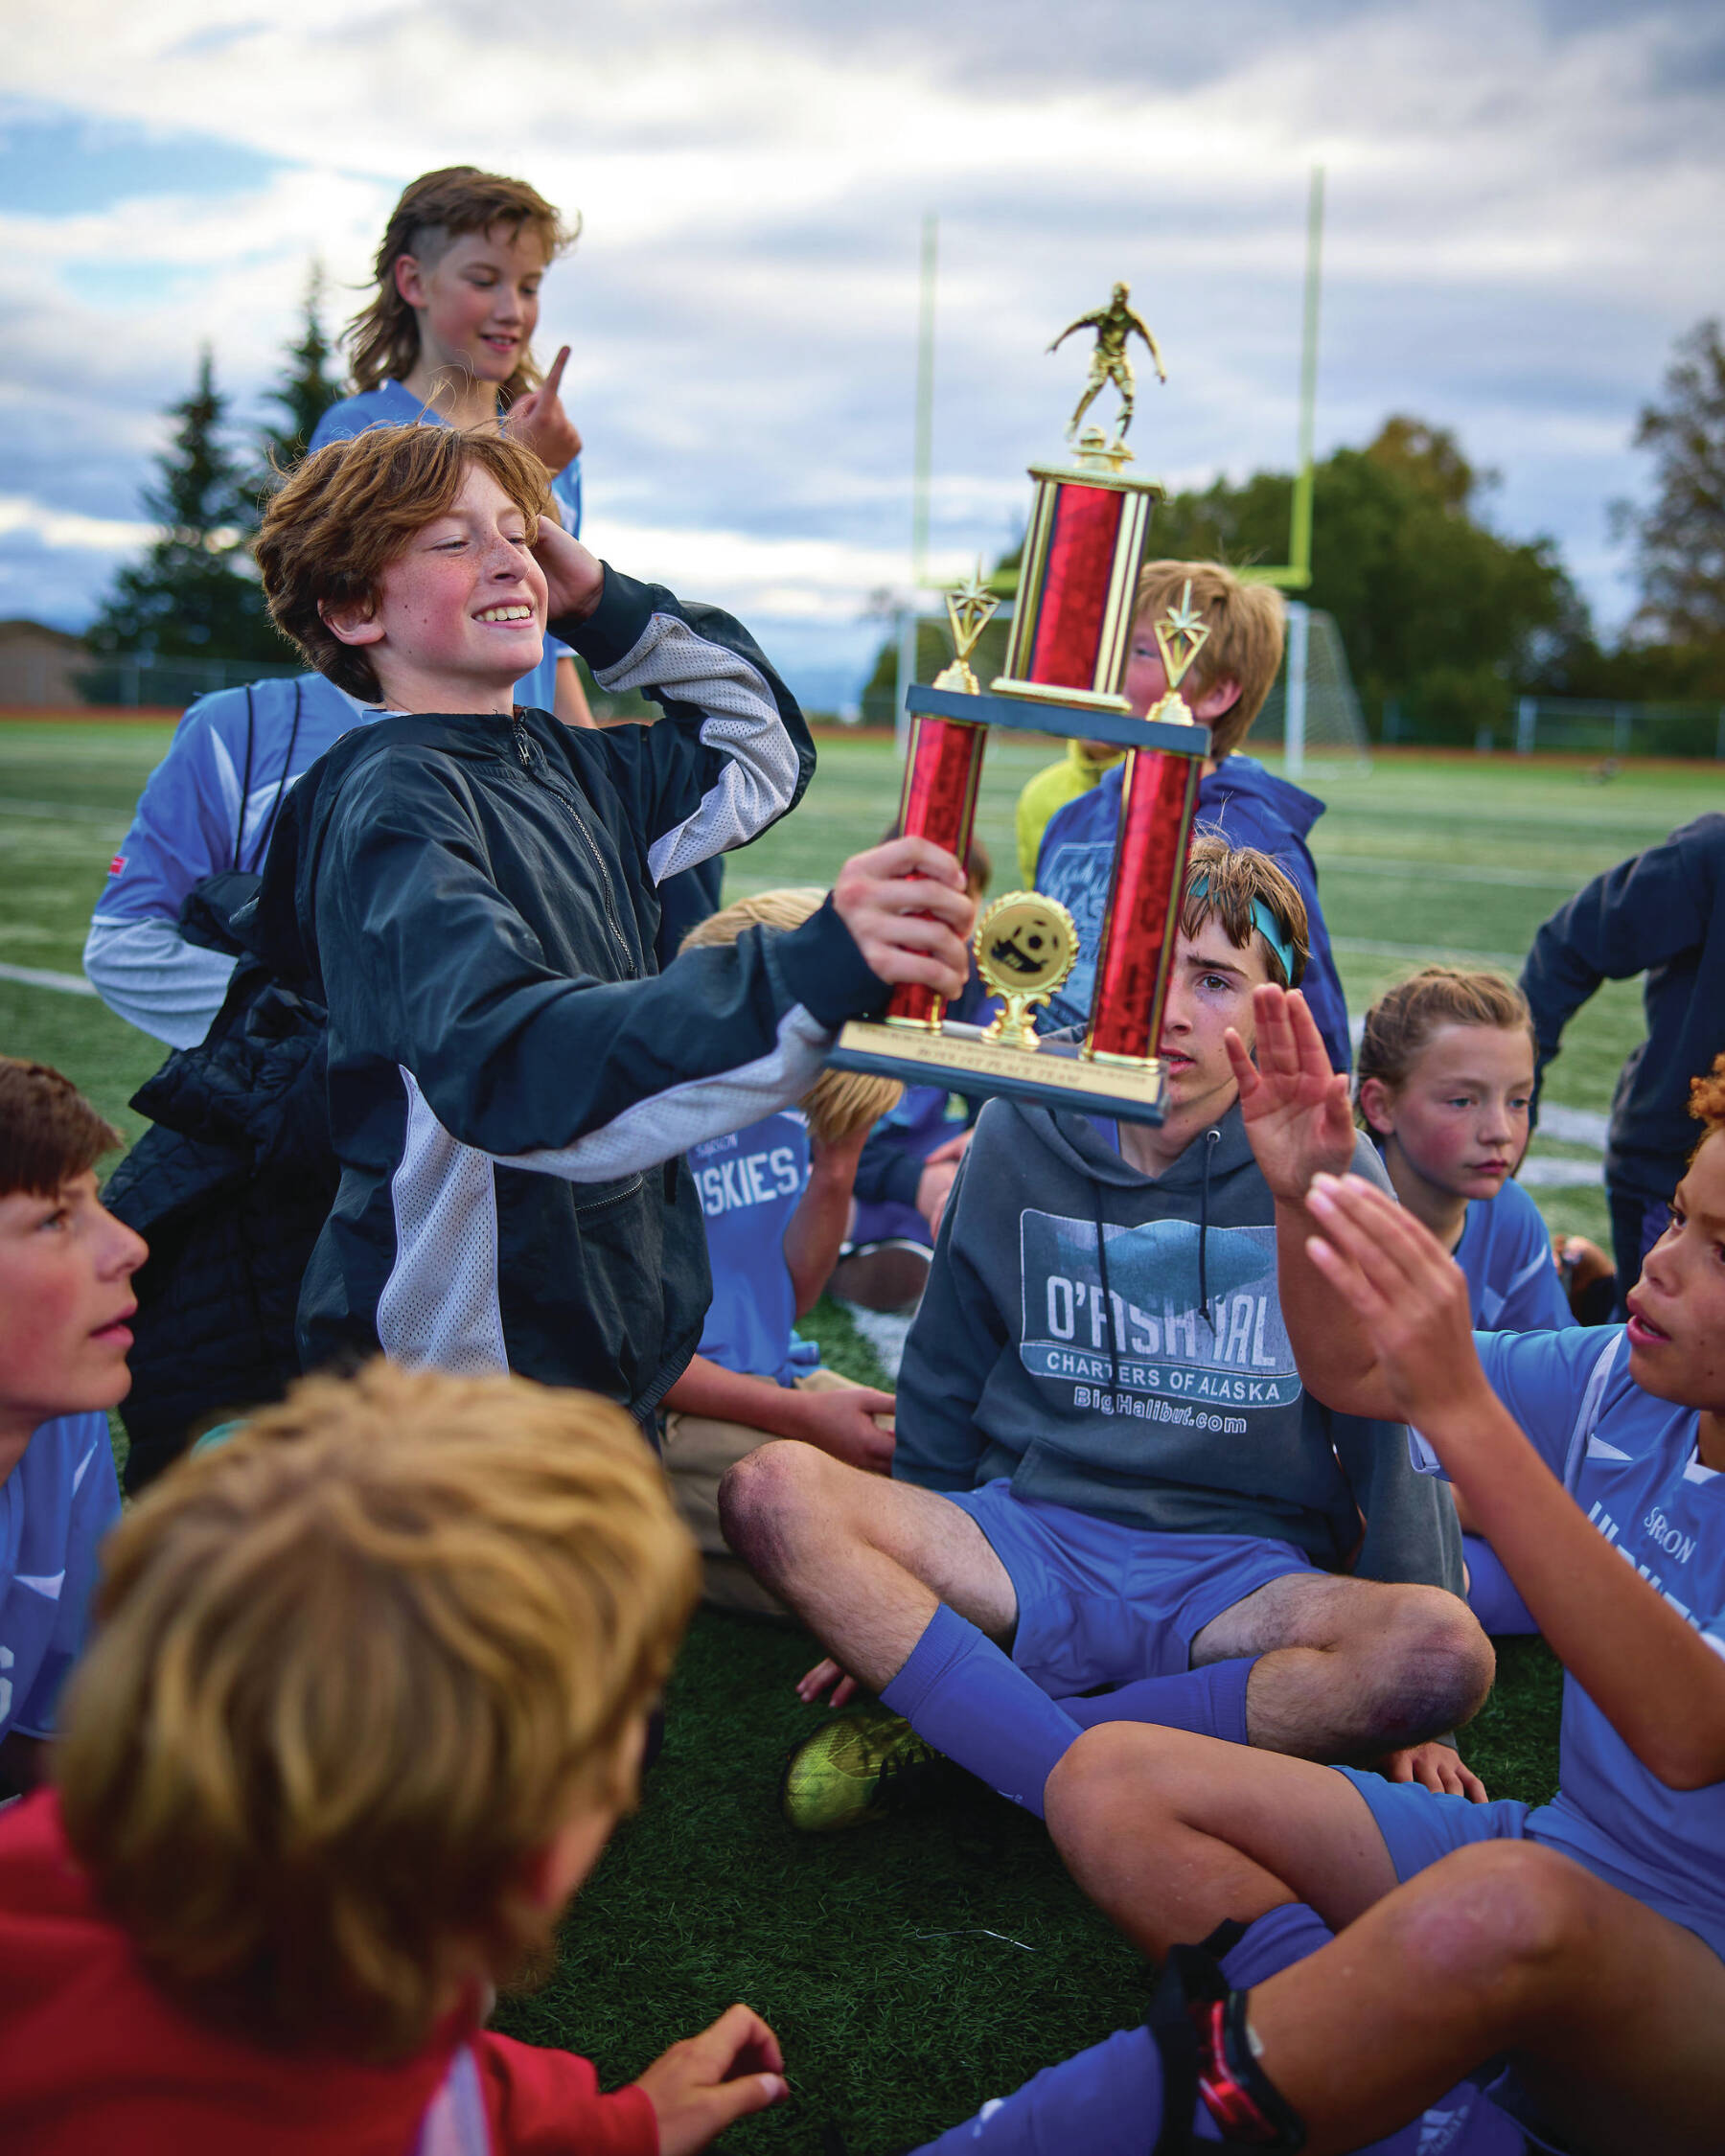 Homer Middle School boys celebrate win of the fall soccer trophy on Sunday, Oct. 1 at the Homer Mariner field. (Photo provided by Christopher Kincaid)